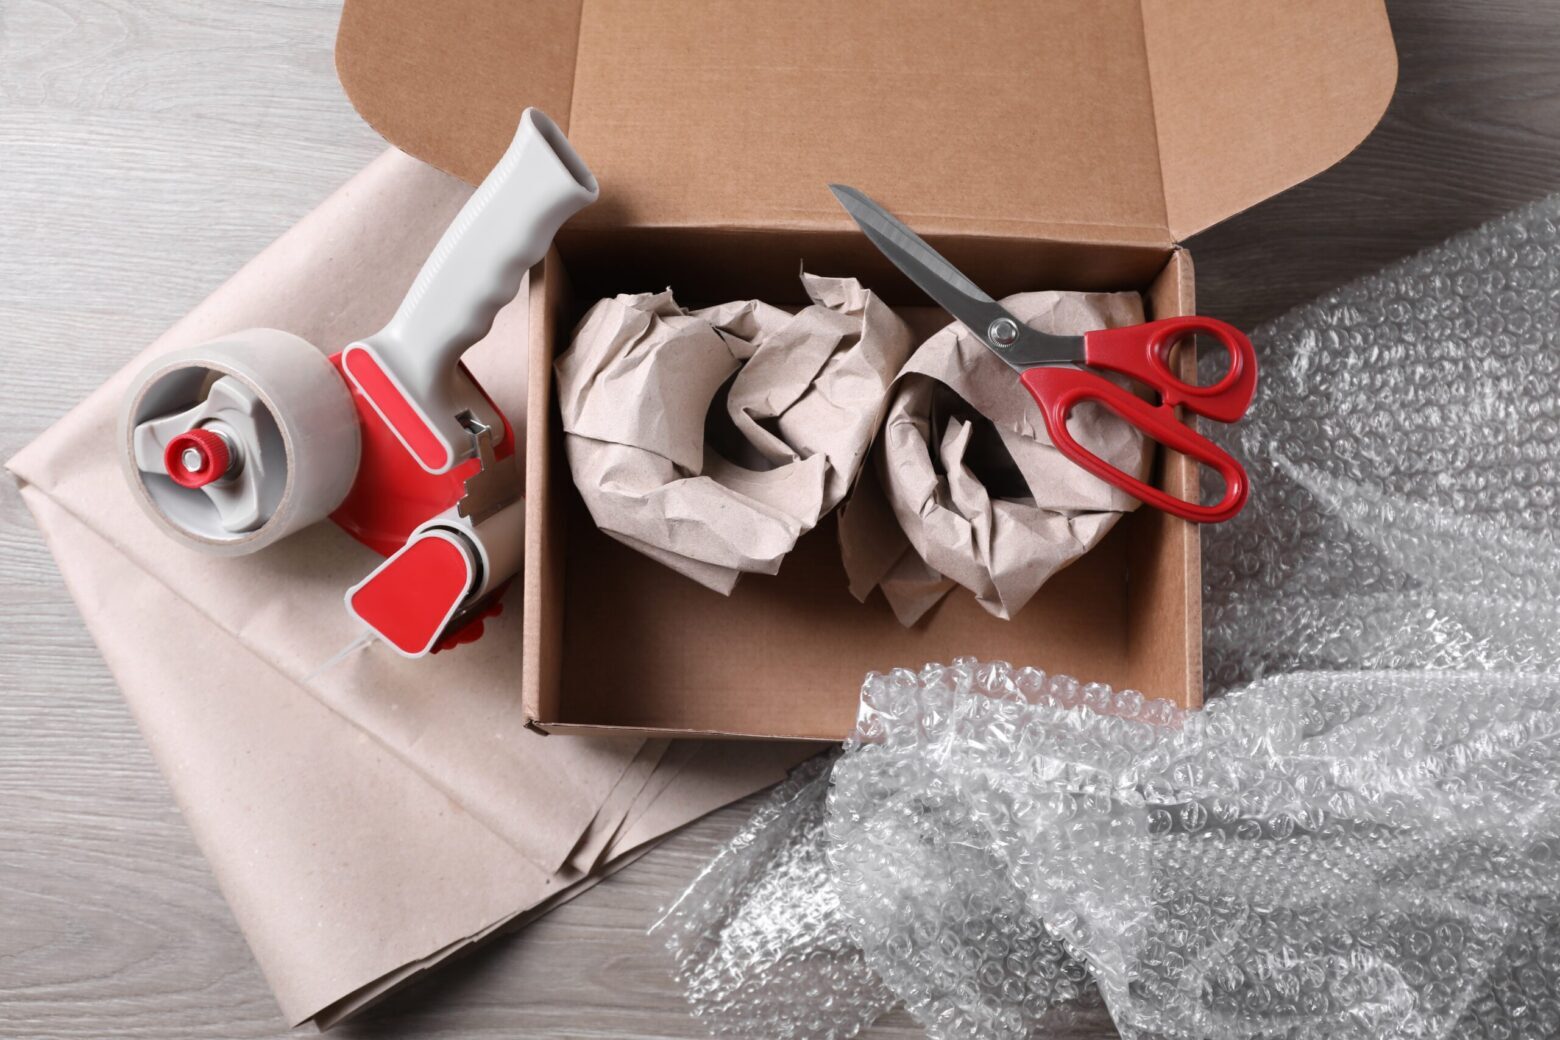 Popular Packaging Materials to Securely Deliver Your Products